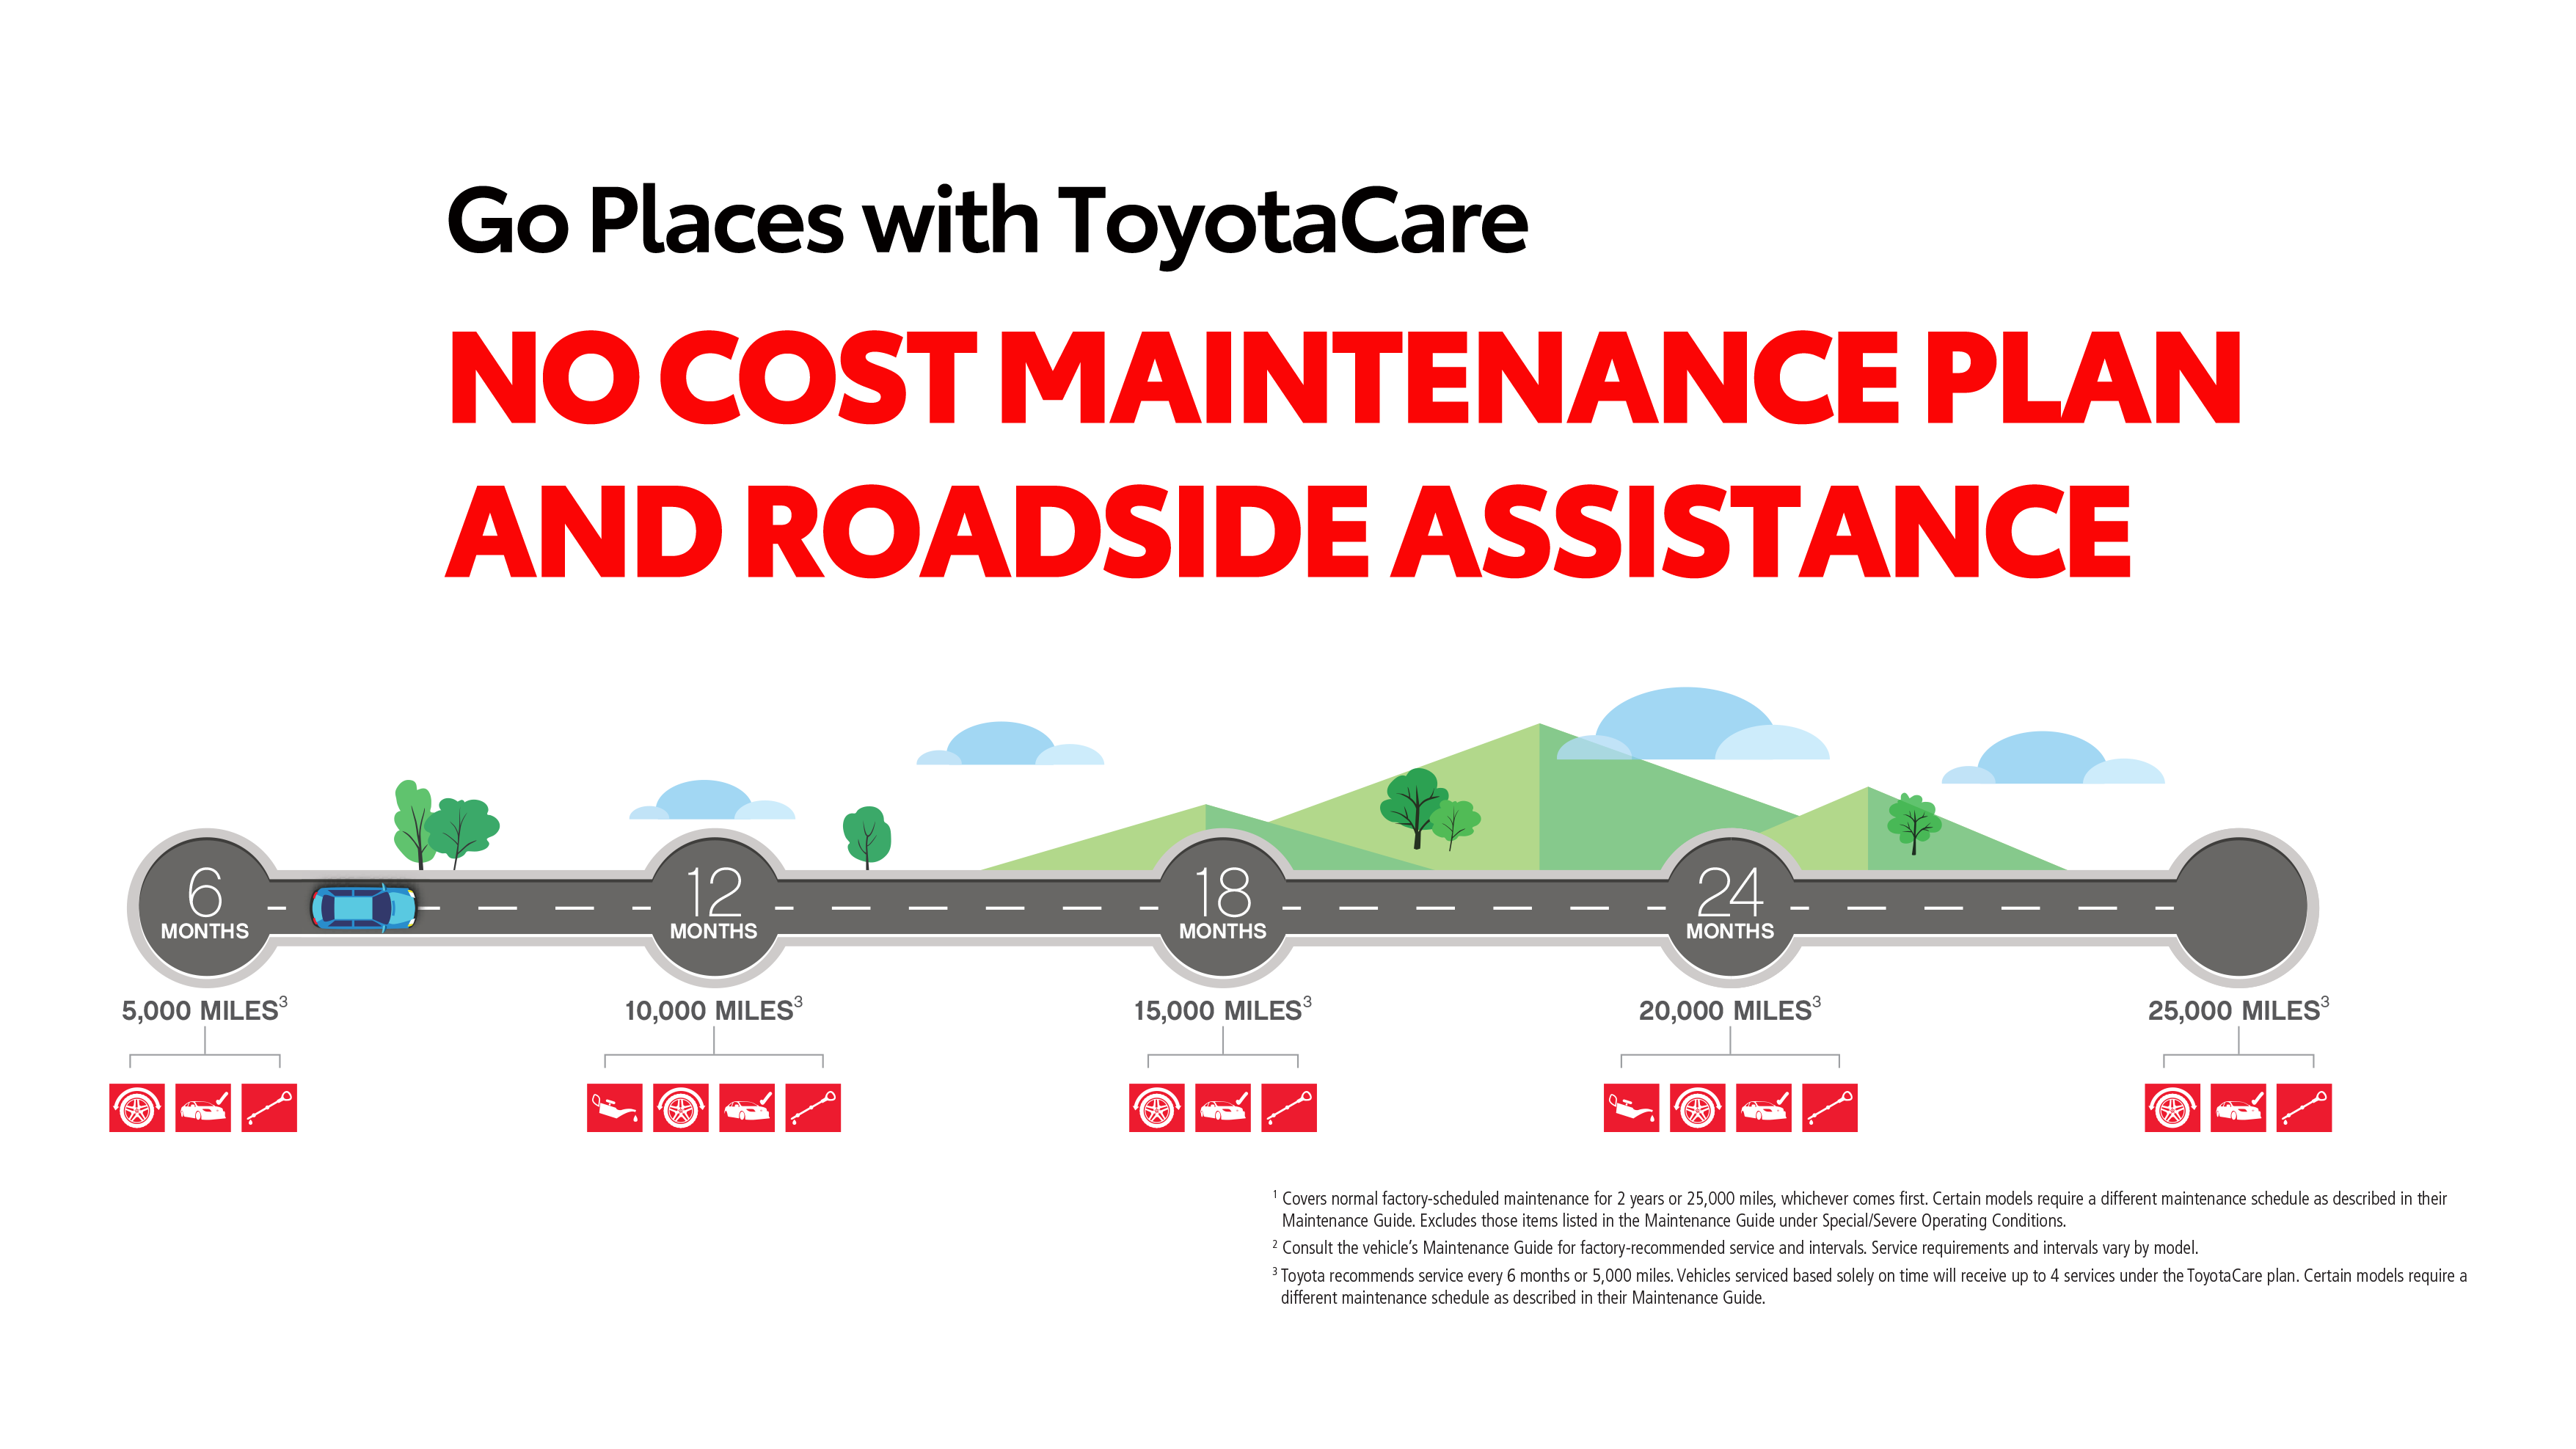 Go Places with ToyotaCare No Cost Maintenance Plan and Roadside Assistance